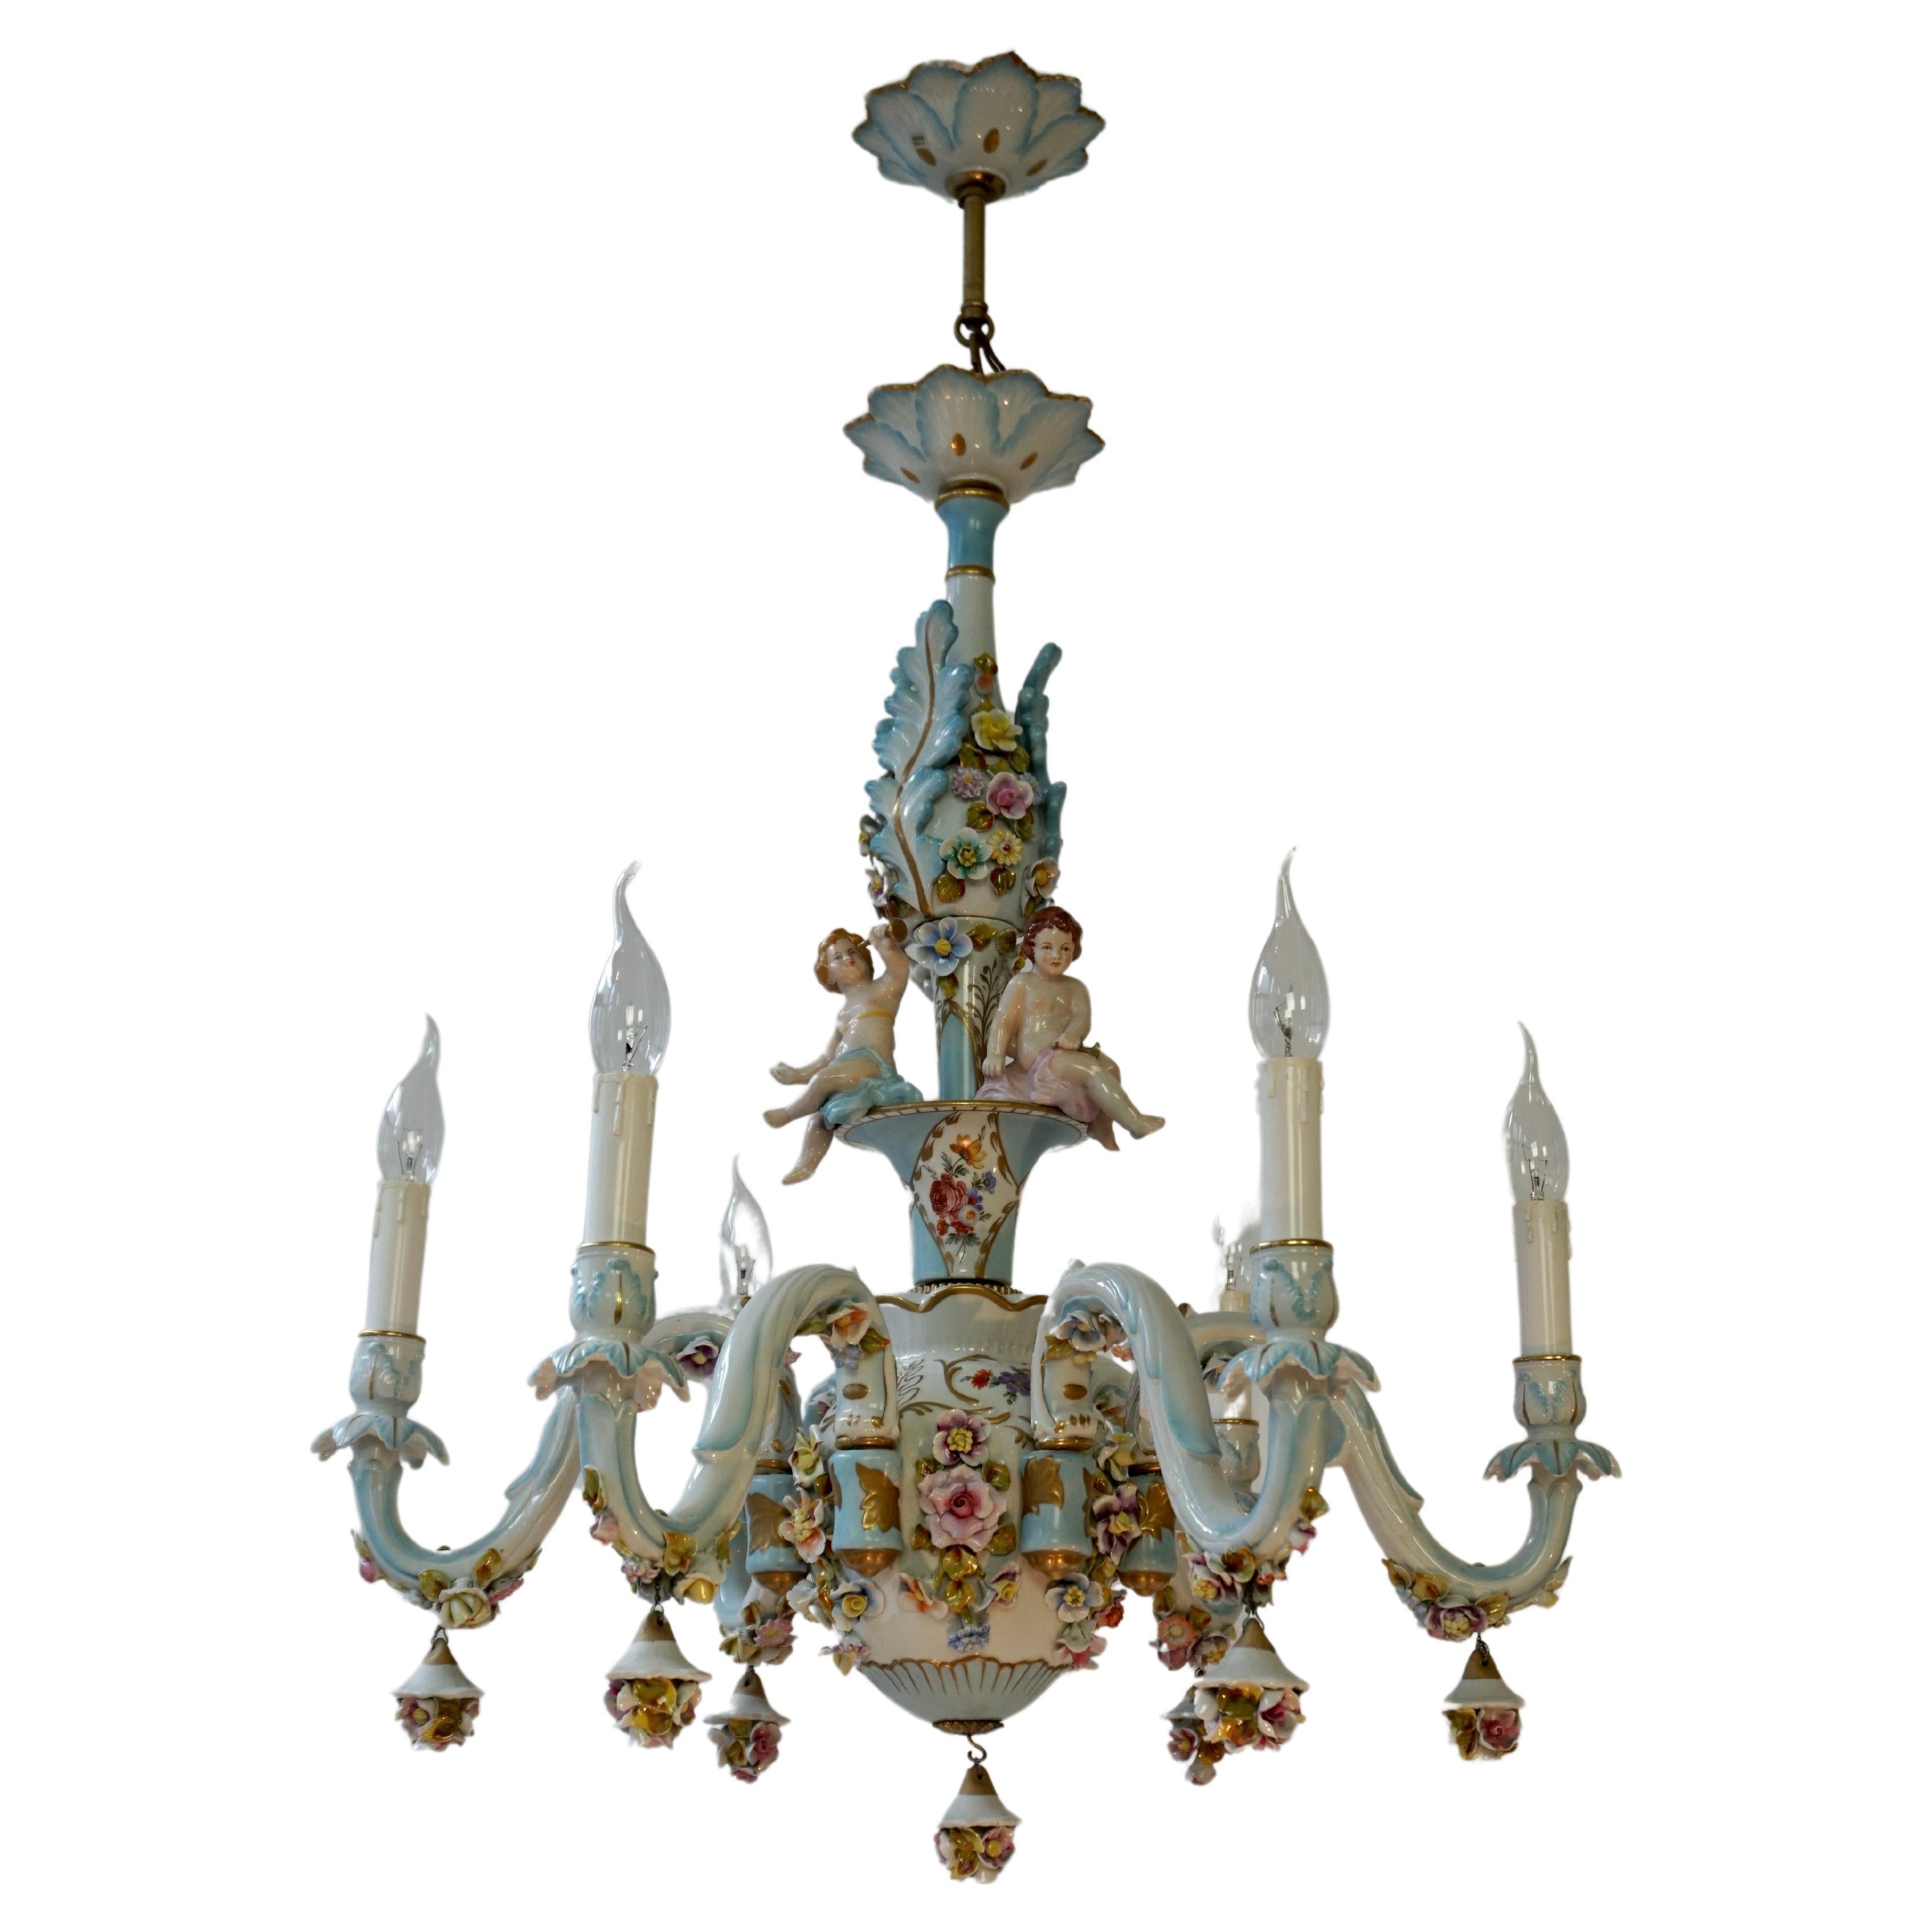 Magnificent Capodimonte chandelier with six lights and three hand painted Cherubs + seven hanging roses.
This one-tier porcelain chandelier has an exceptional quality. It is crafted and hand painted by the renowned Italian Capodimonte pottery